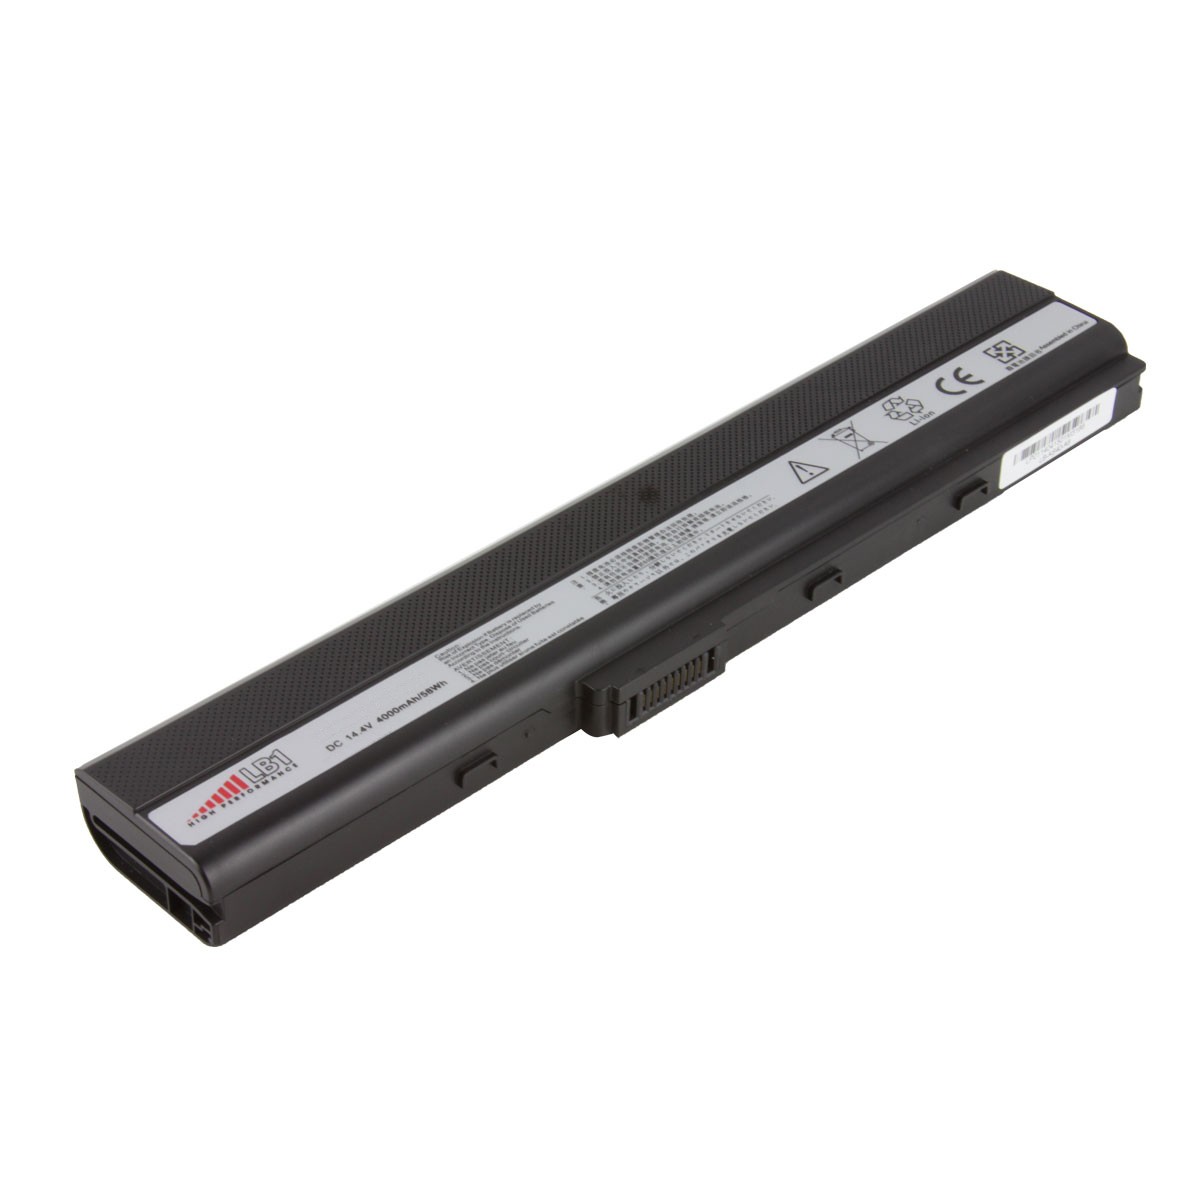 BATTERY FOR NOTEBOOK ASUS A32- K52  K42 M&M COPY, Laptop Battery